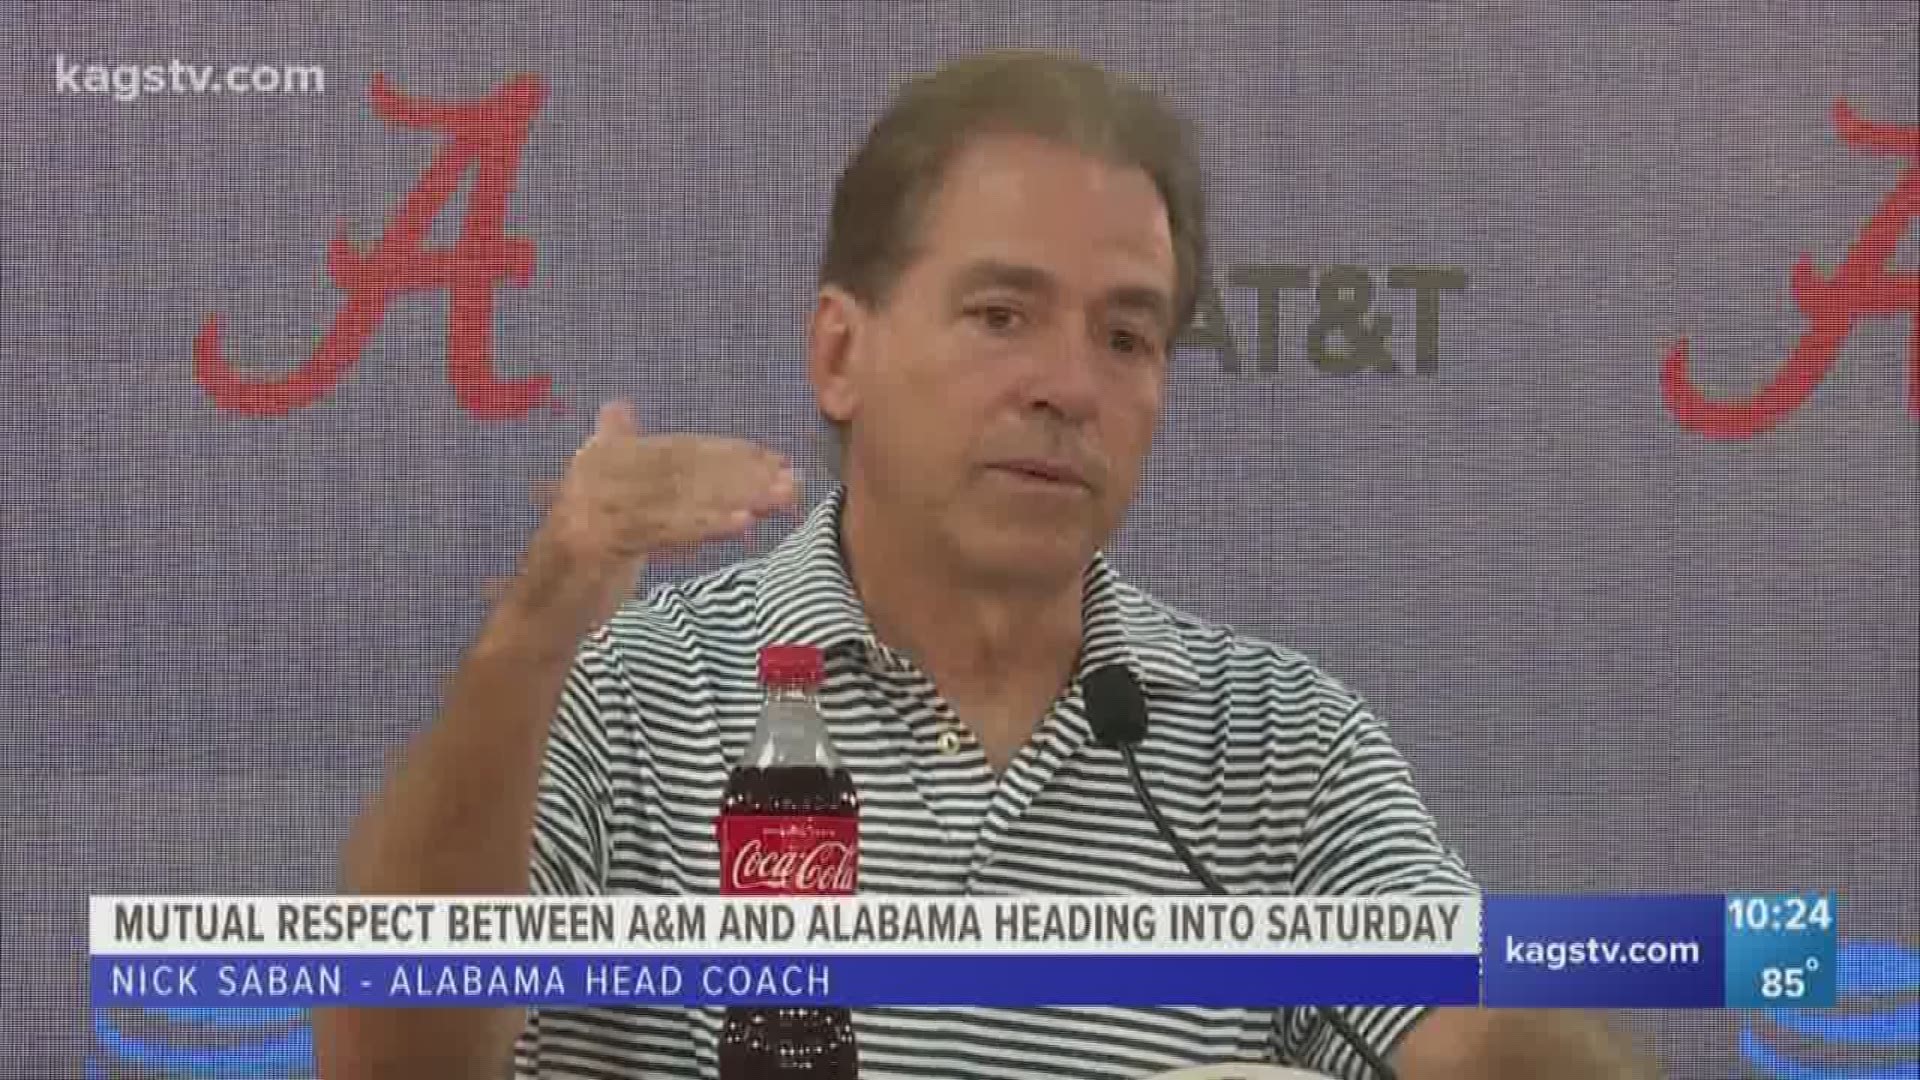 Nick Saban was very complimentary of Jimbo Fisher & the Aggies when he met the Alabama media on Monday.